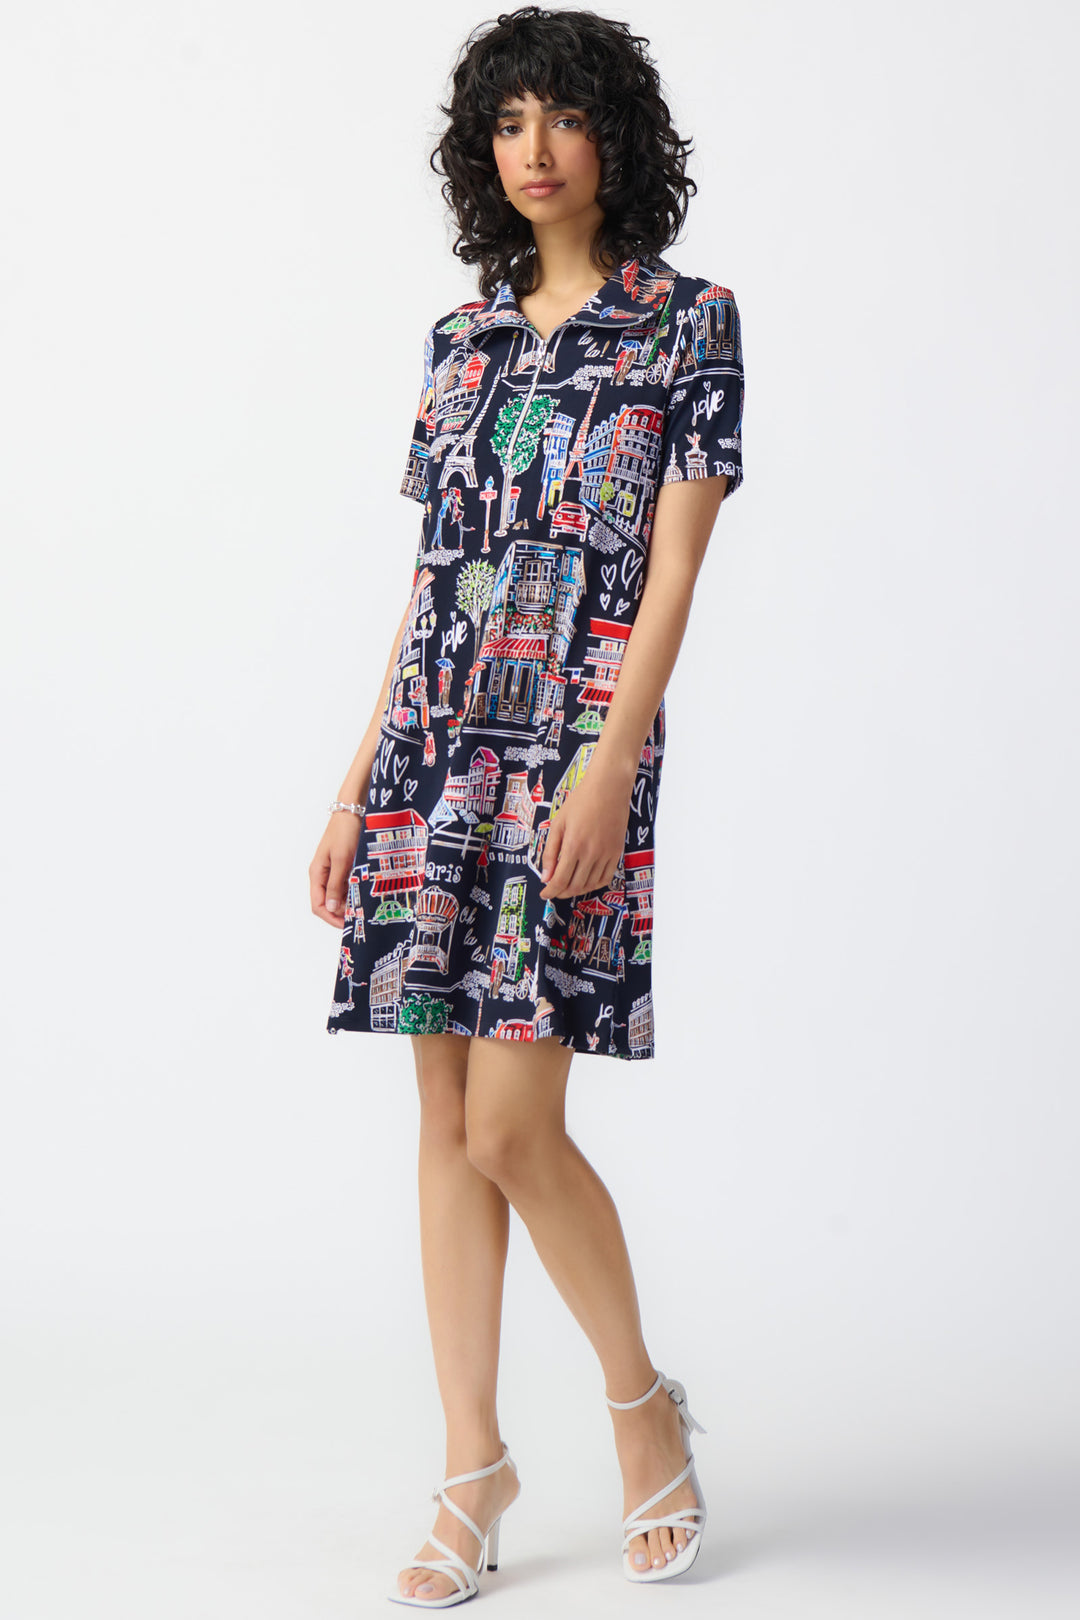 Featuring a zippered neckline and a beautiful Parisian scene, this short dress is the perfect travel companion